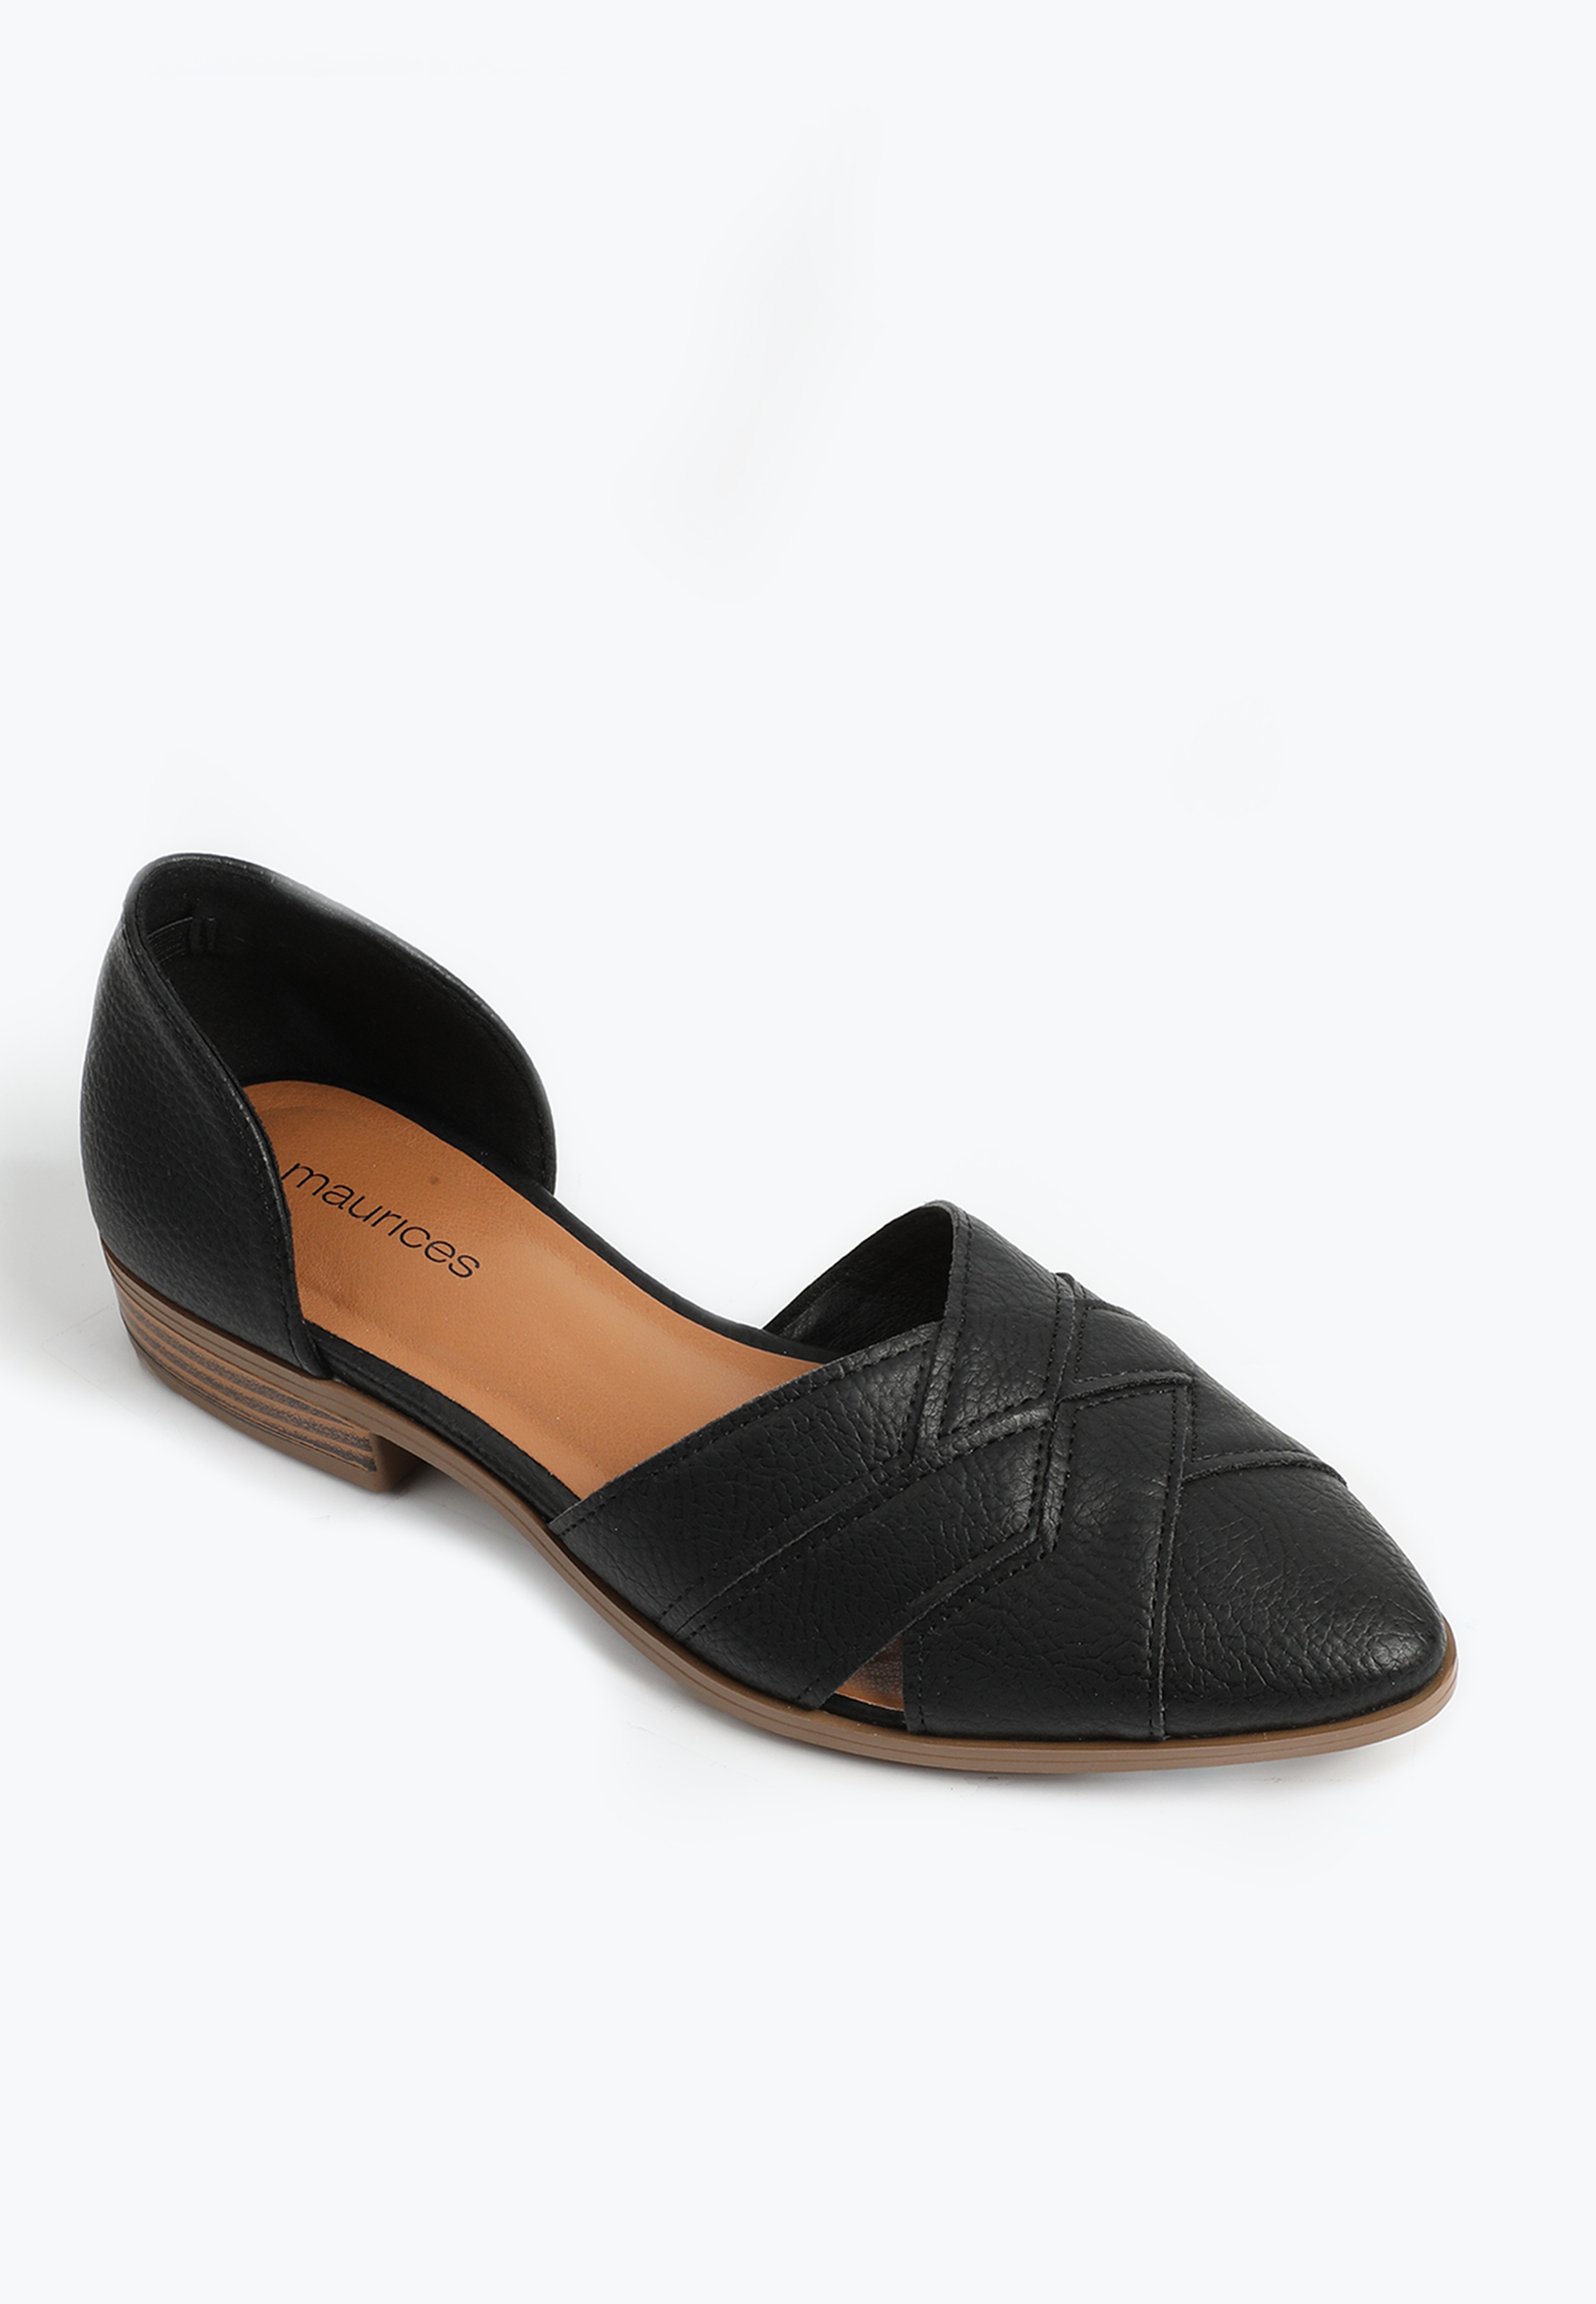 SuperCush Shelby D'Orsay Flat | maurices